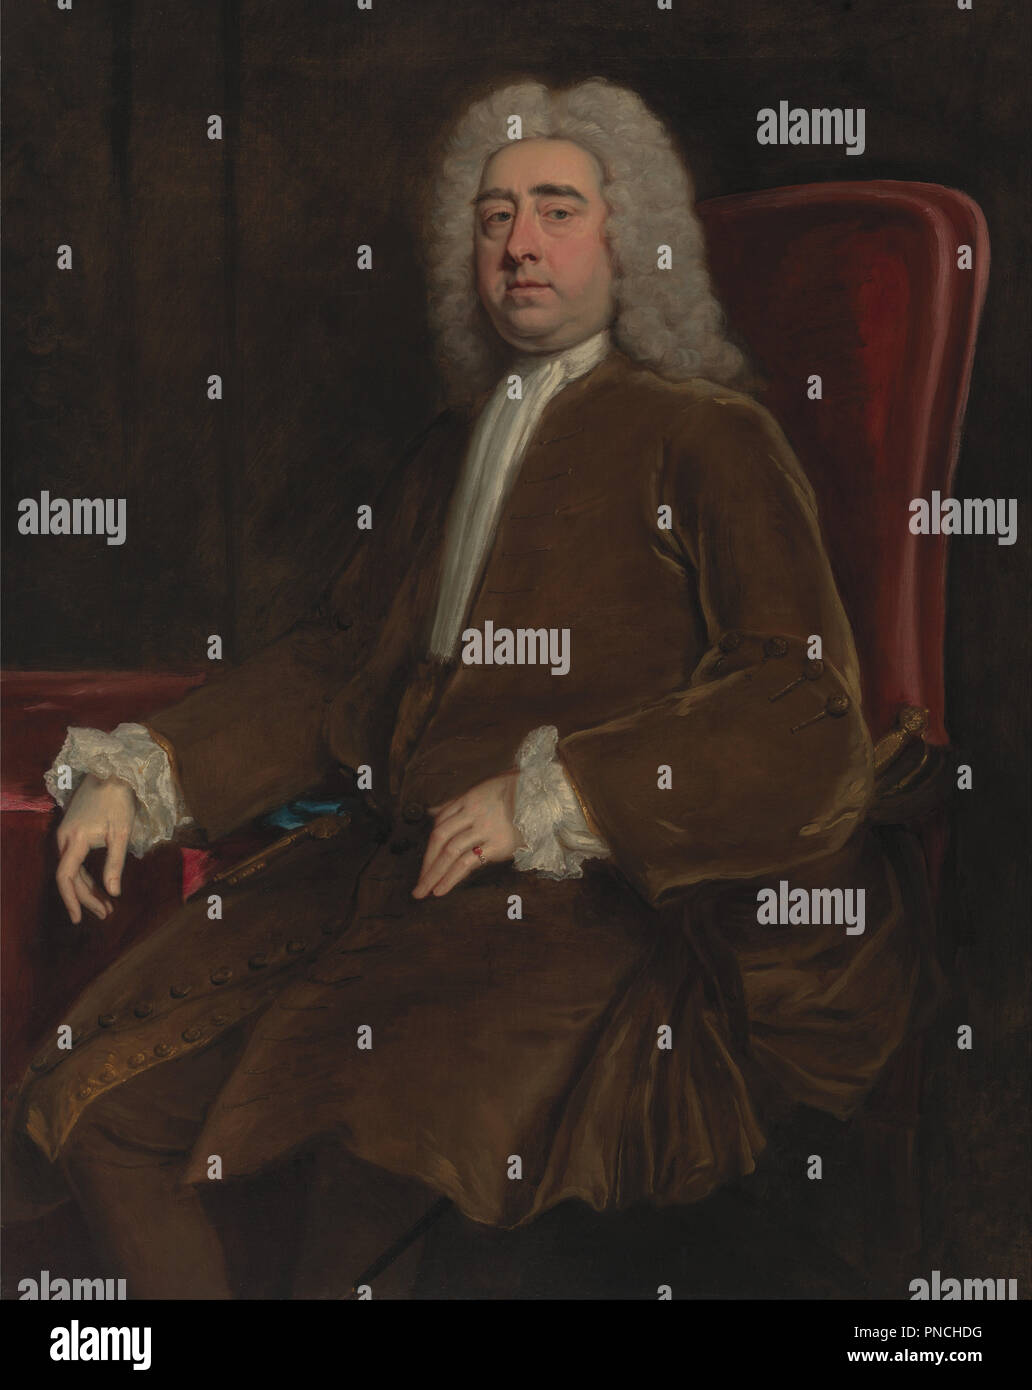 Francis, 2nd Earl of Godolphin. Date/Period: Ca. 1725. Painting. Oil on canvas. Height: 1,245 mm (49.01 in); Width: 991 mm (39.01 in). Author: Jonathan Richardson the Elder. Stock Photo